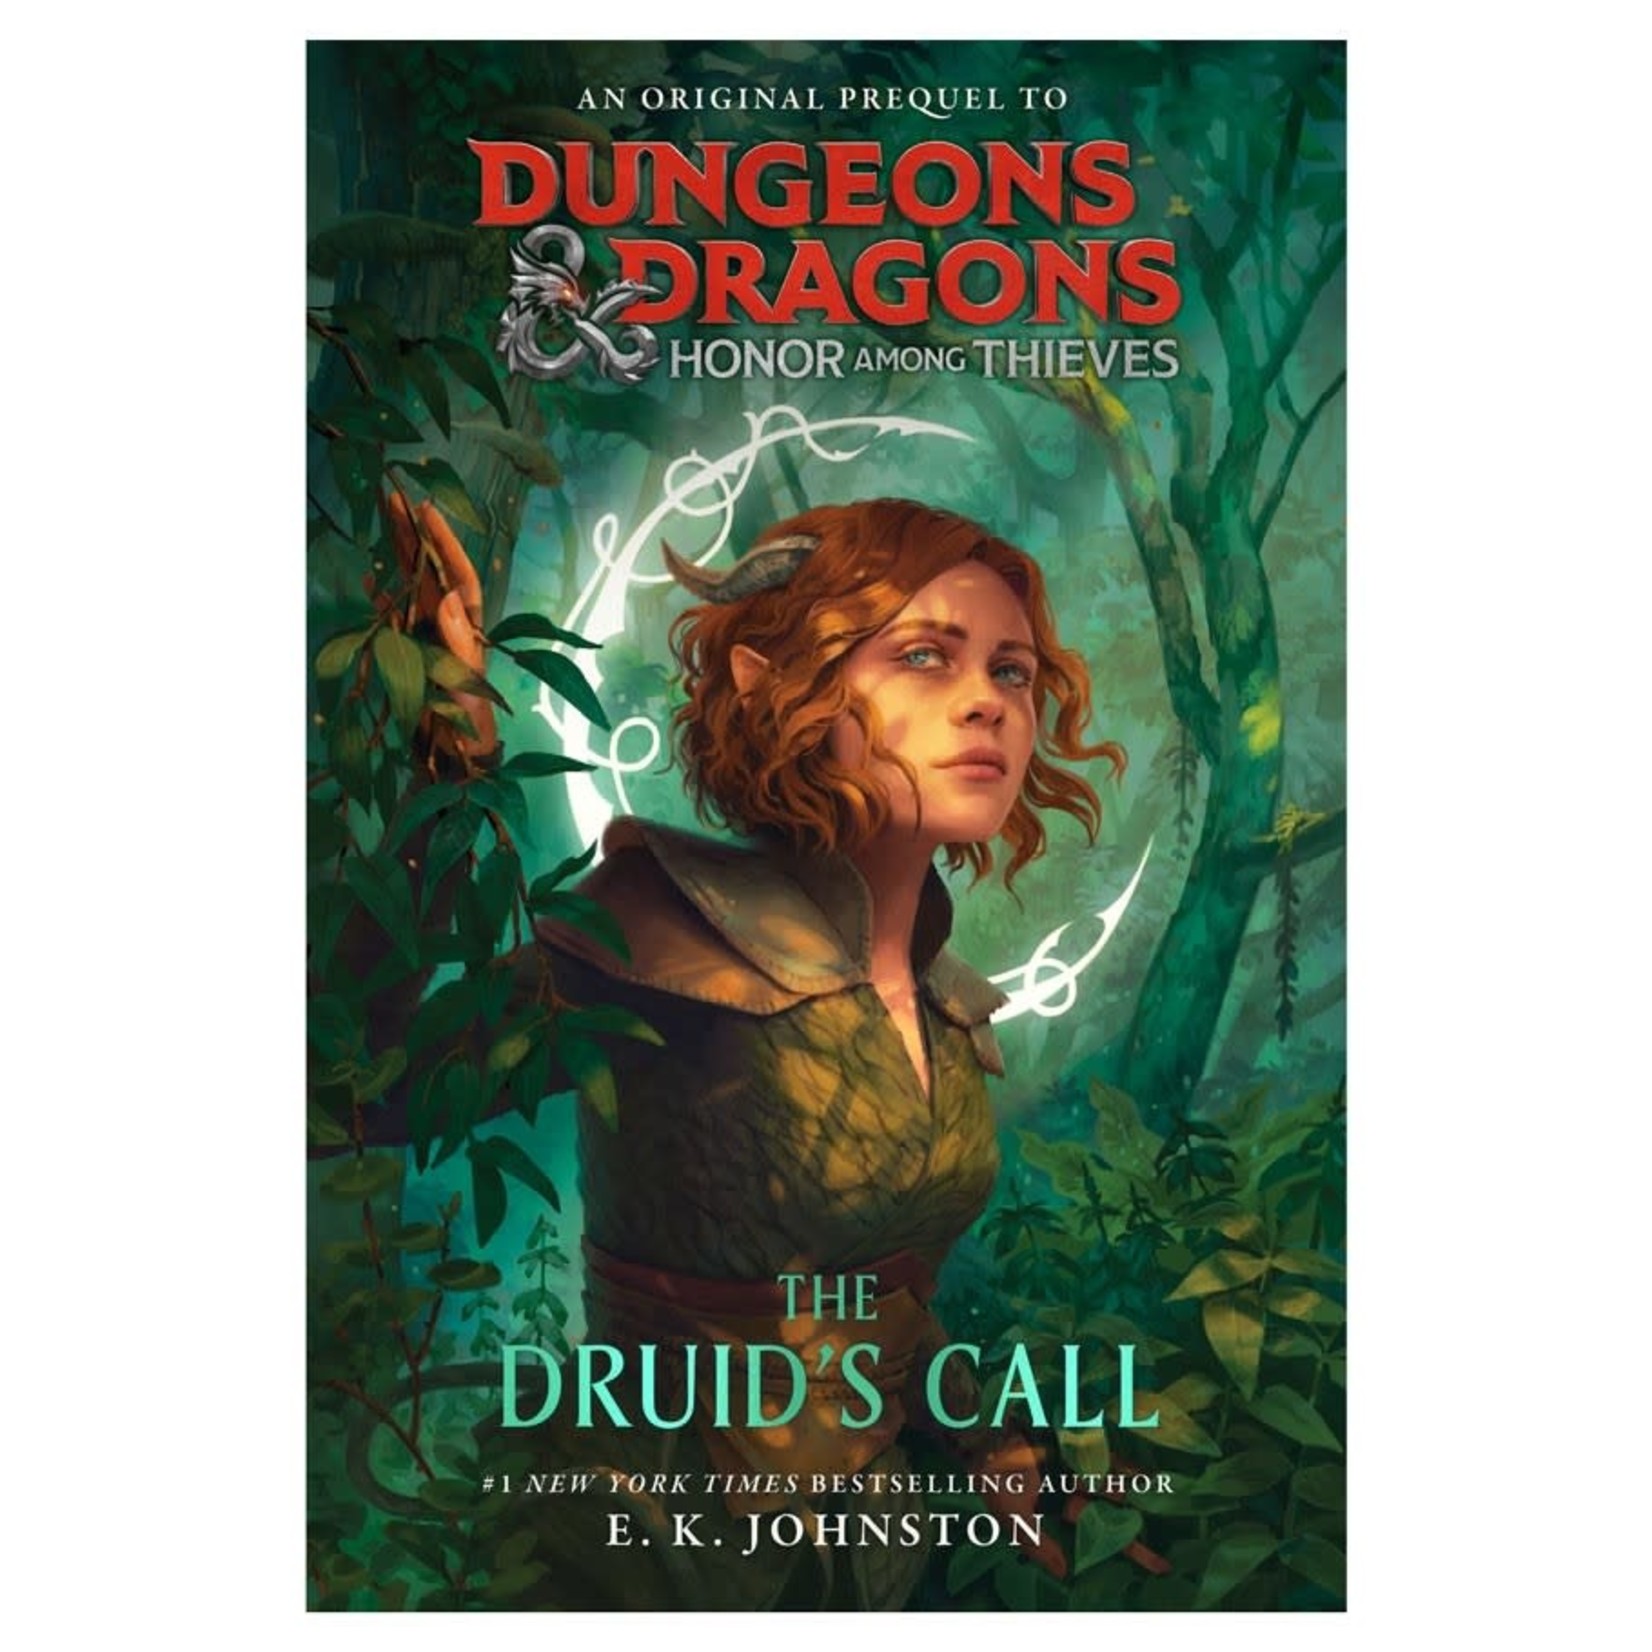 D&D Honor Among Thieves: The Druid's Call